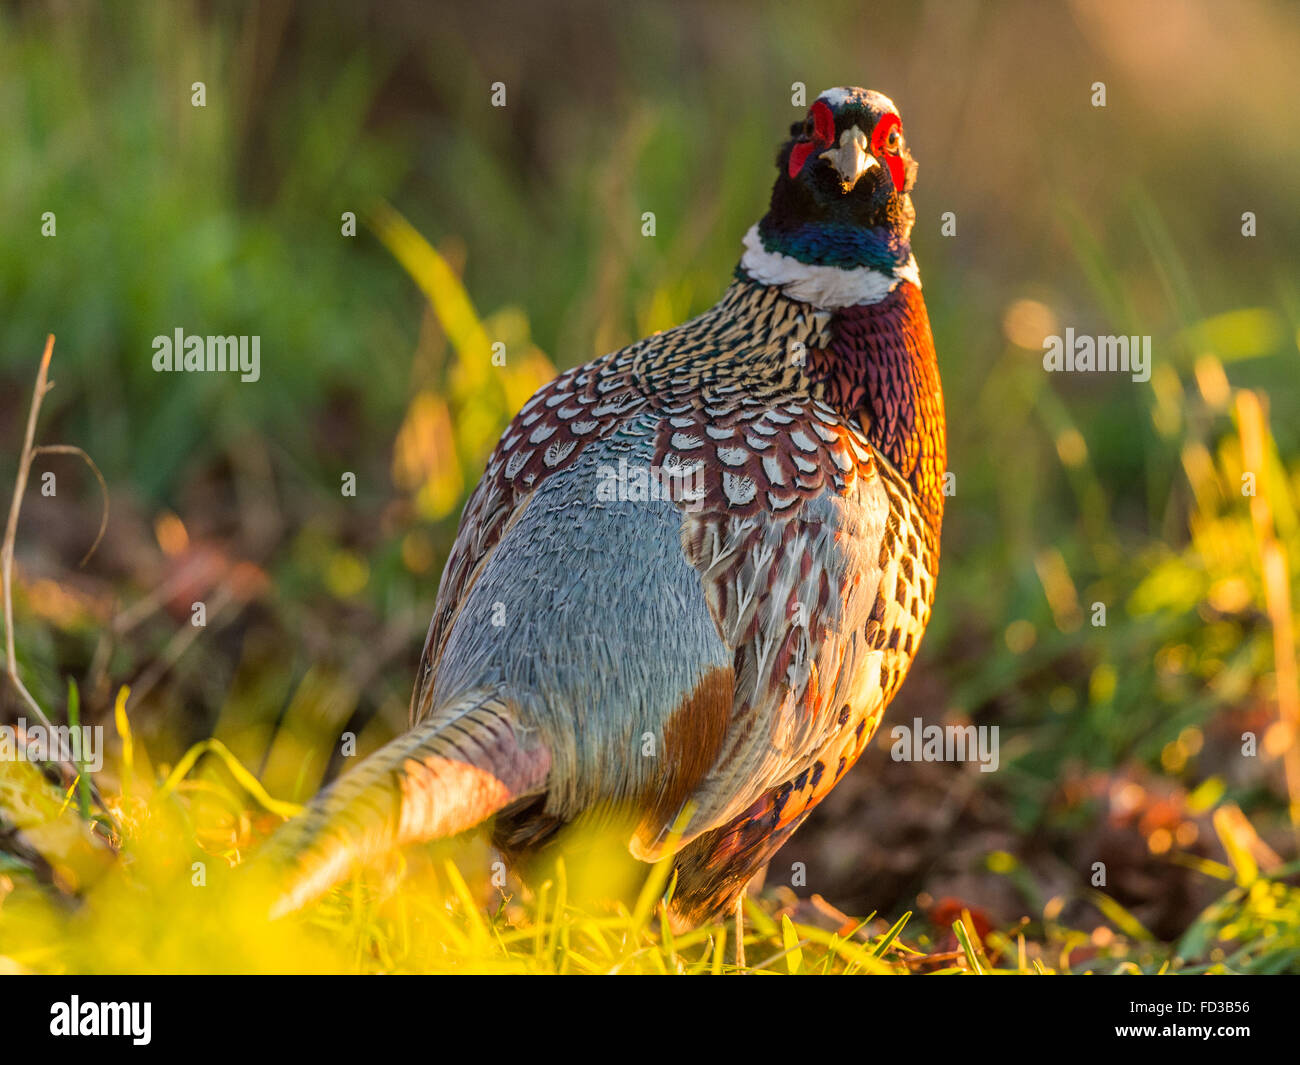 Beautiful Male Common British Ring-necked Pheasant (Phasianus colchicus) foraging in natural woodland forest setting. Stock Photo